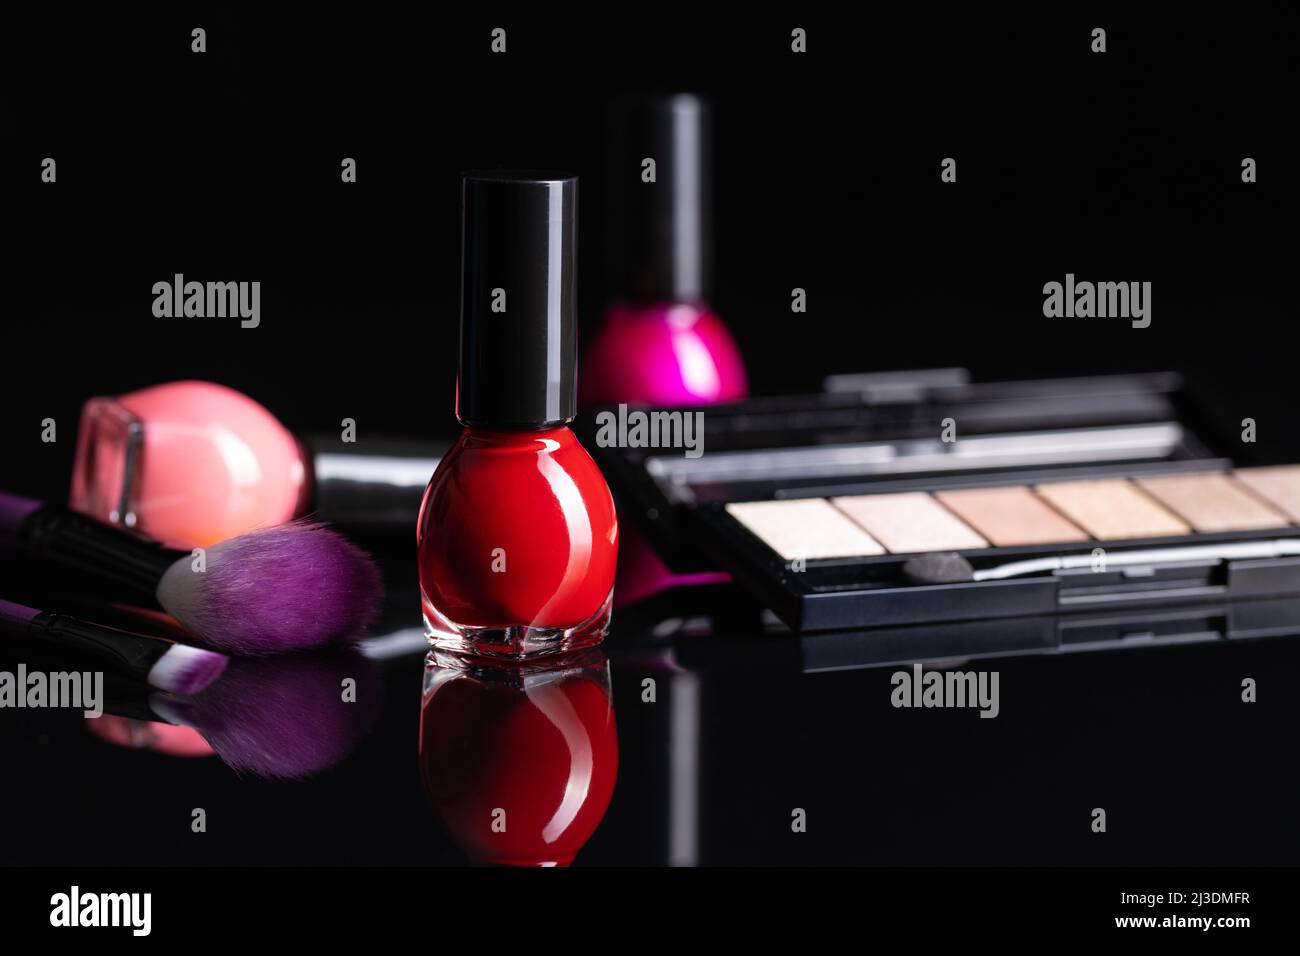 Set of cosmetic makeup products. Eyeshadow, nail polish and makeup brushes on a black table. Stock Photo